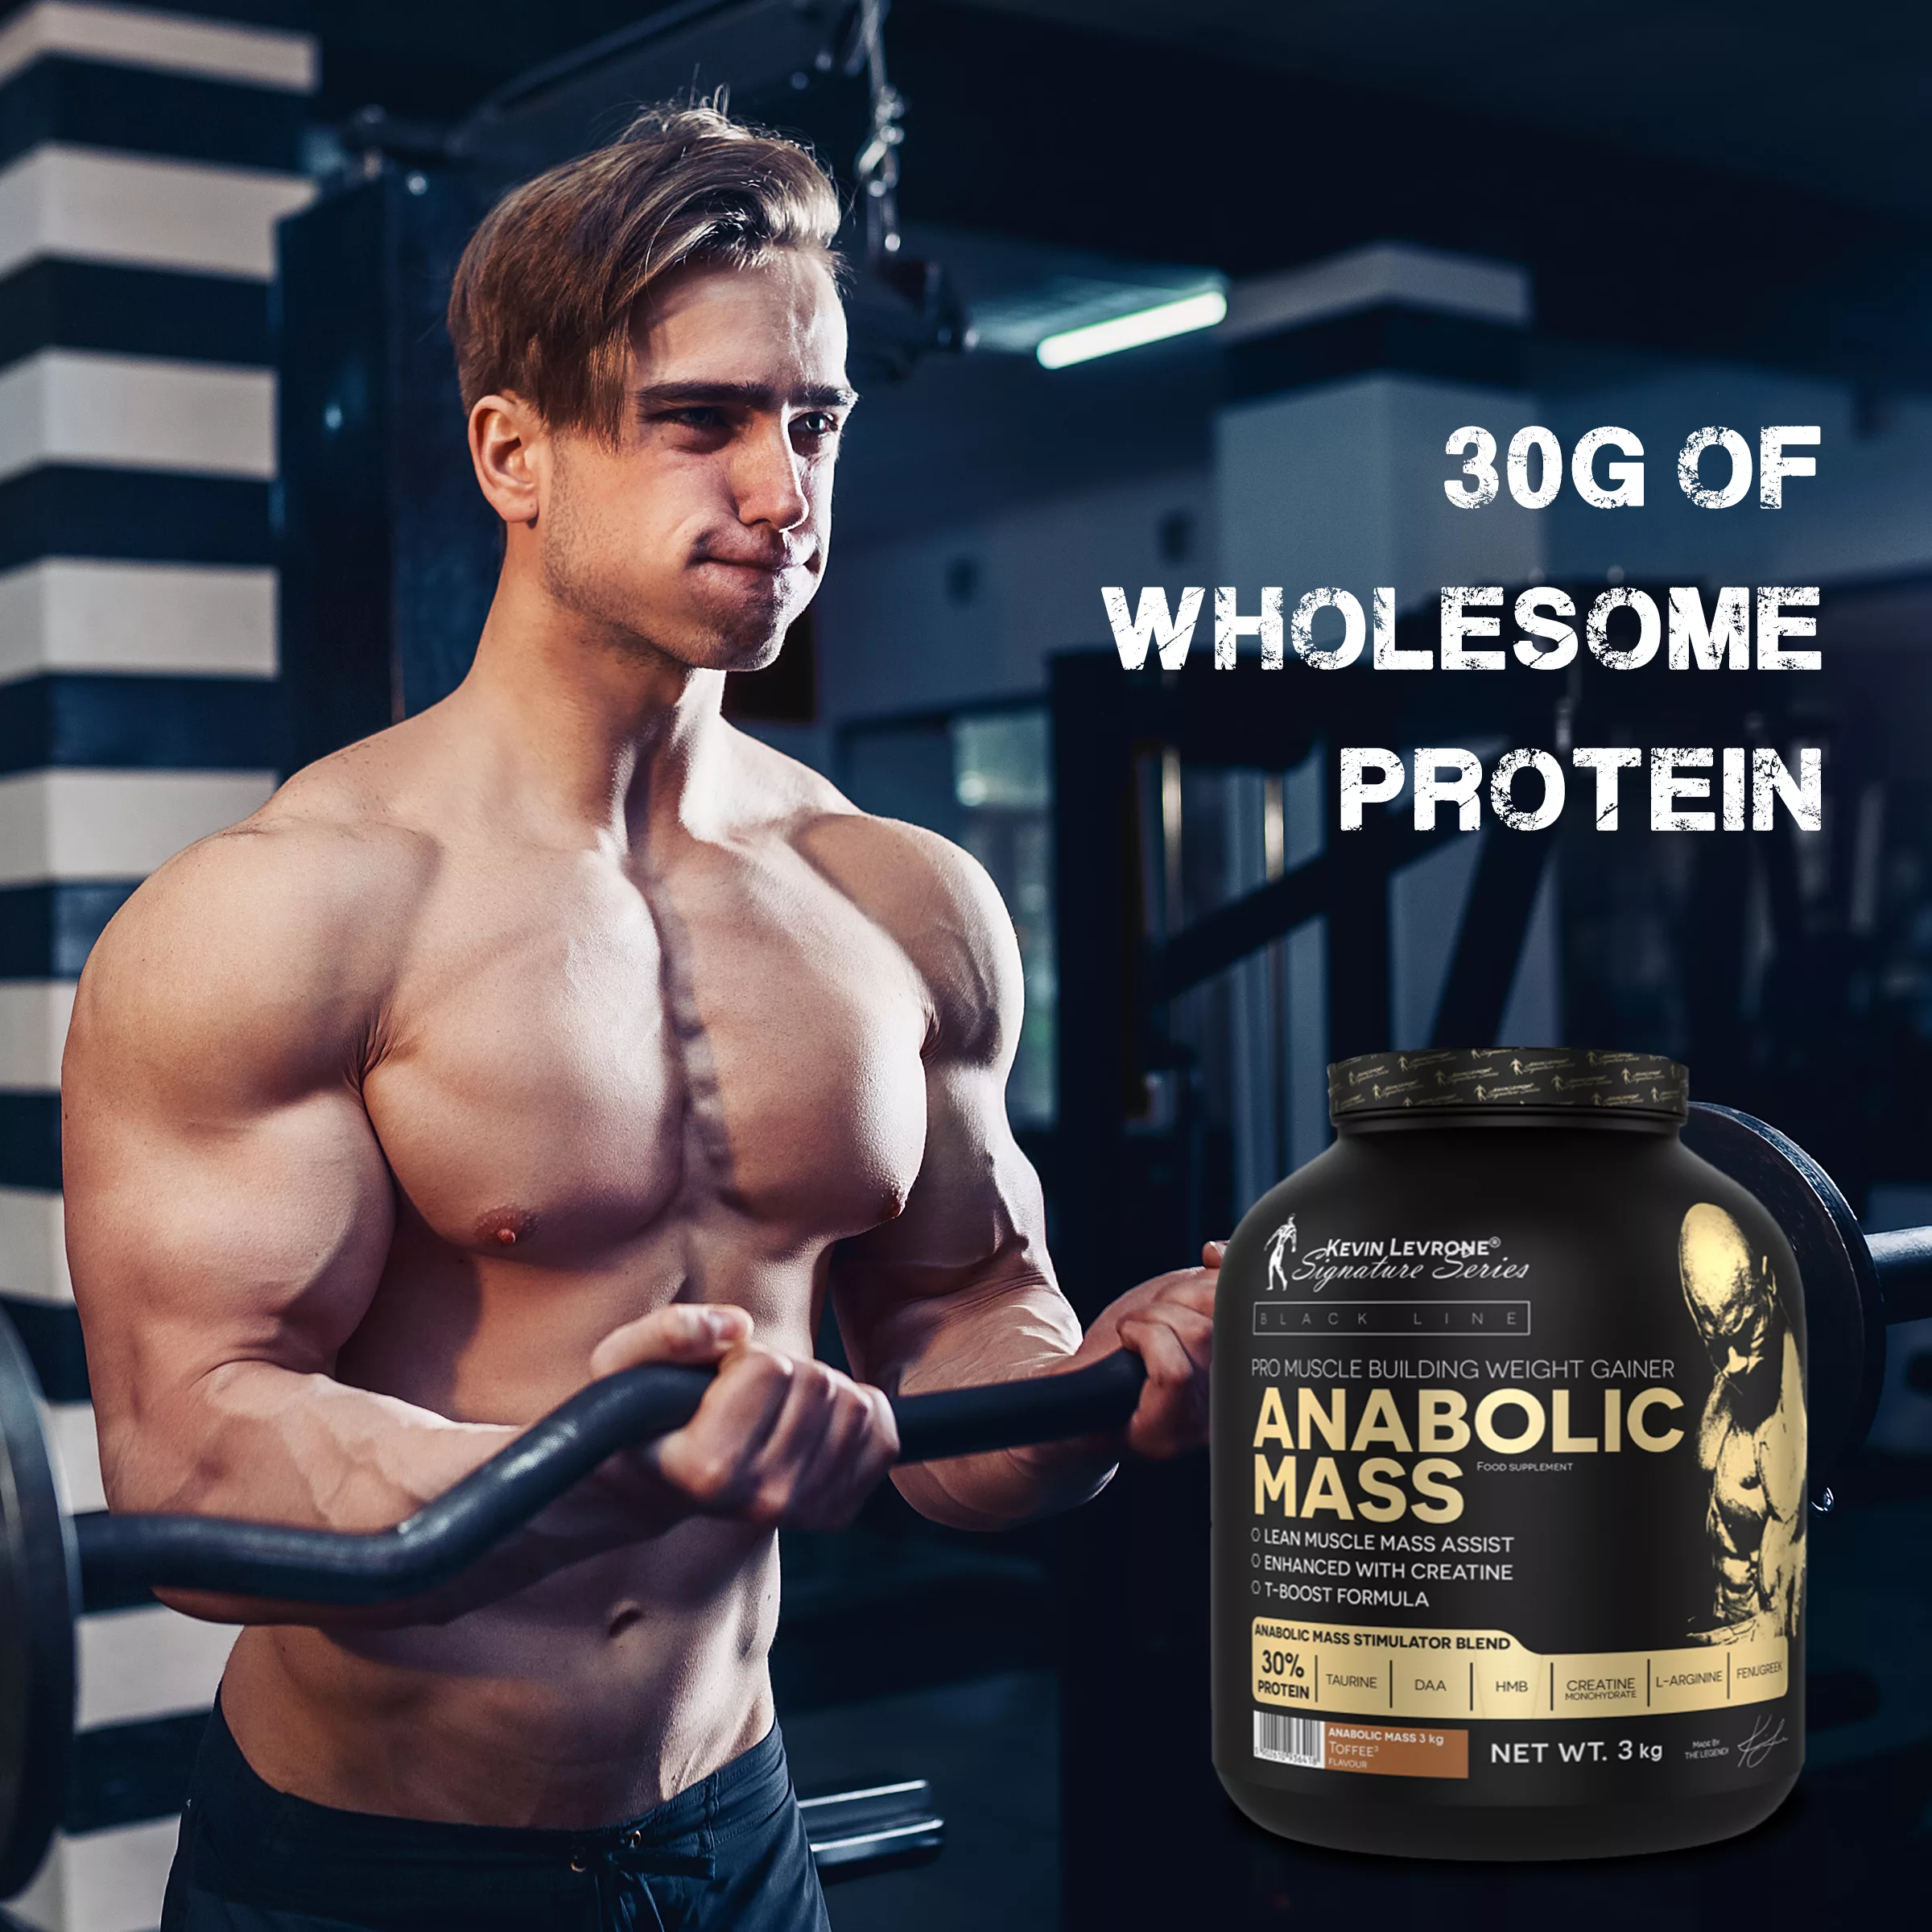 30g of Wholesome Protein